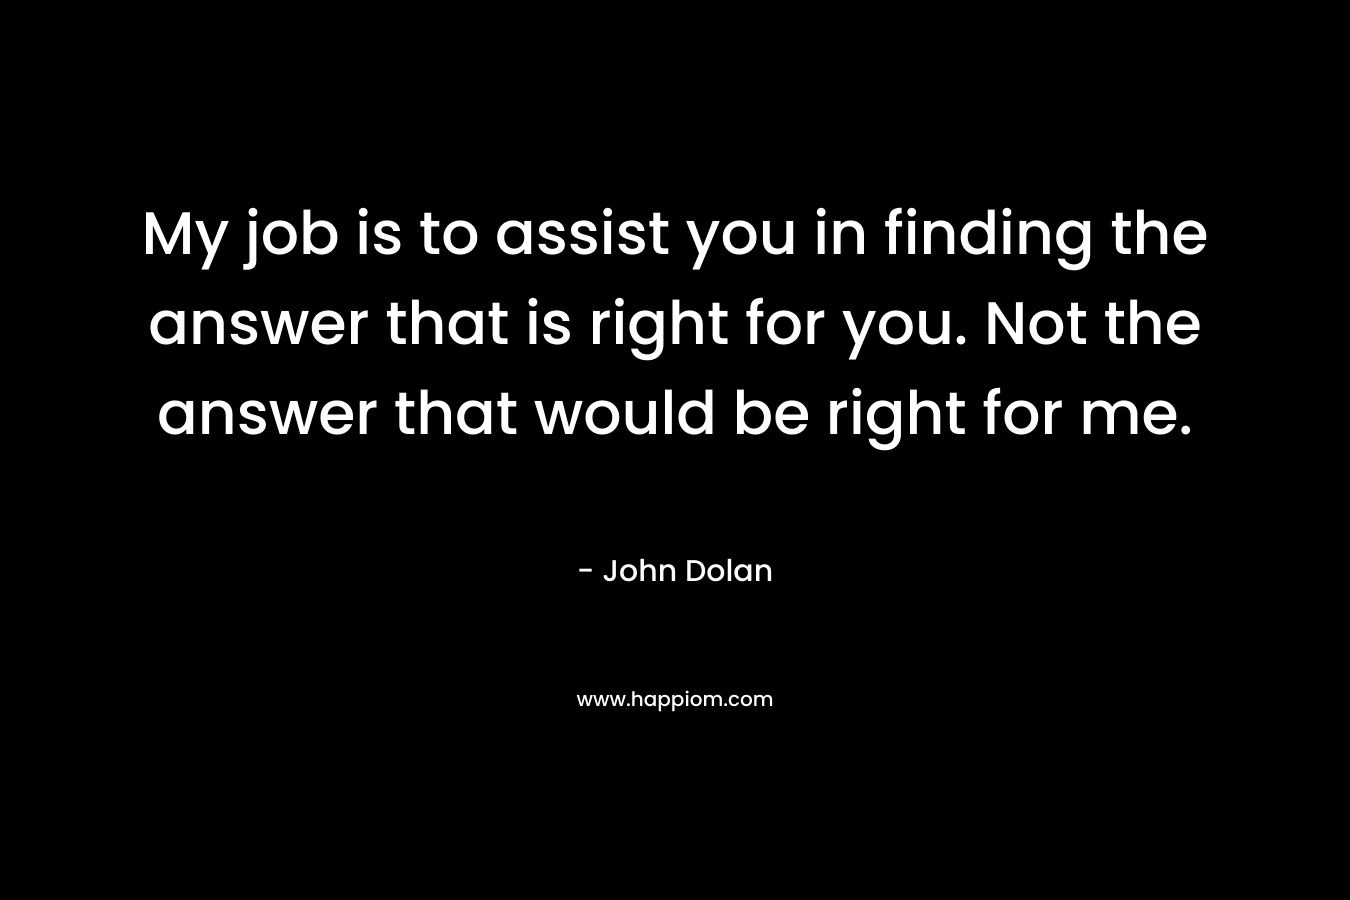 My job is to assist you in finding the answer that is right for you. Not the answer that would be right for me. – John Dolan